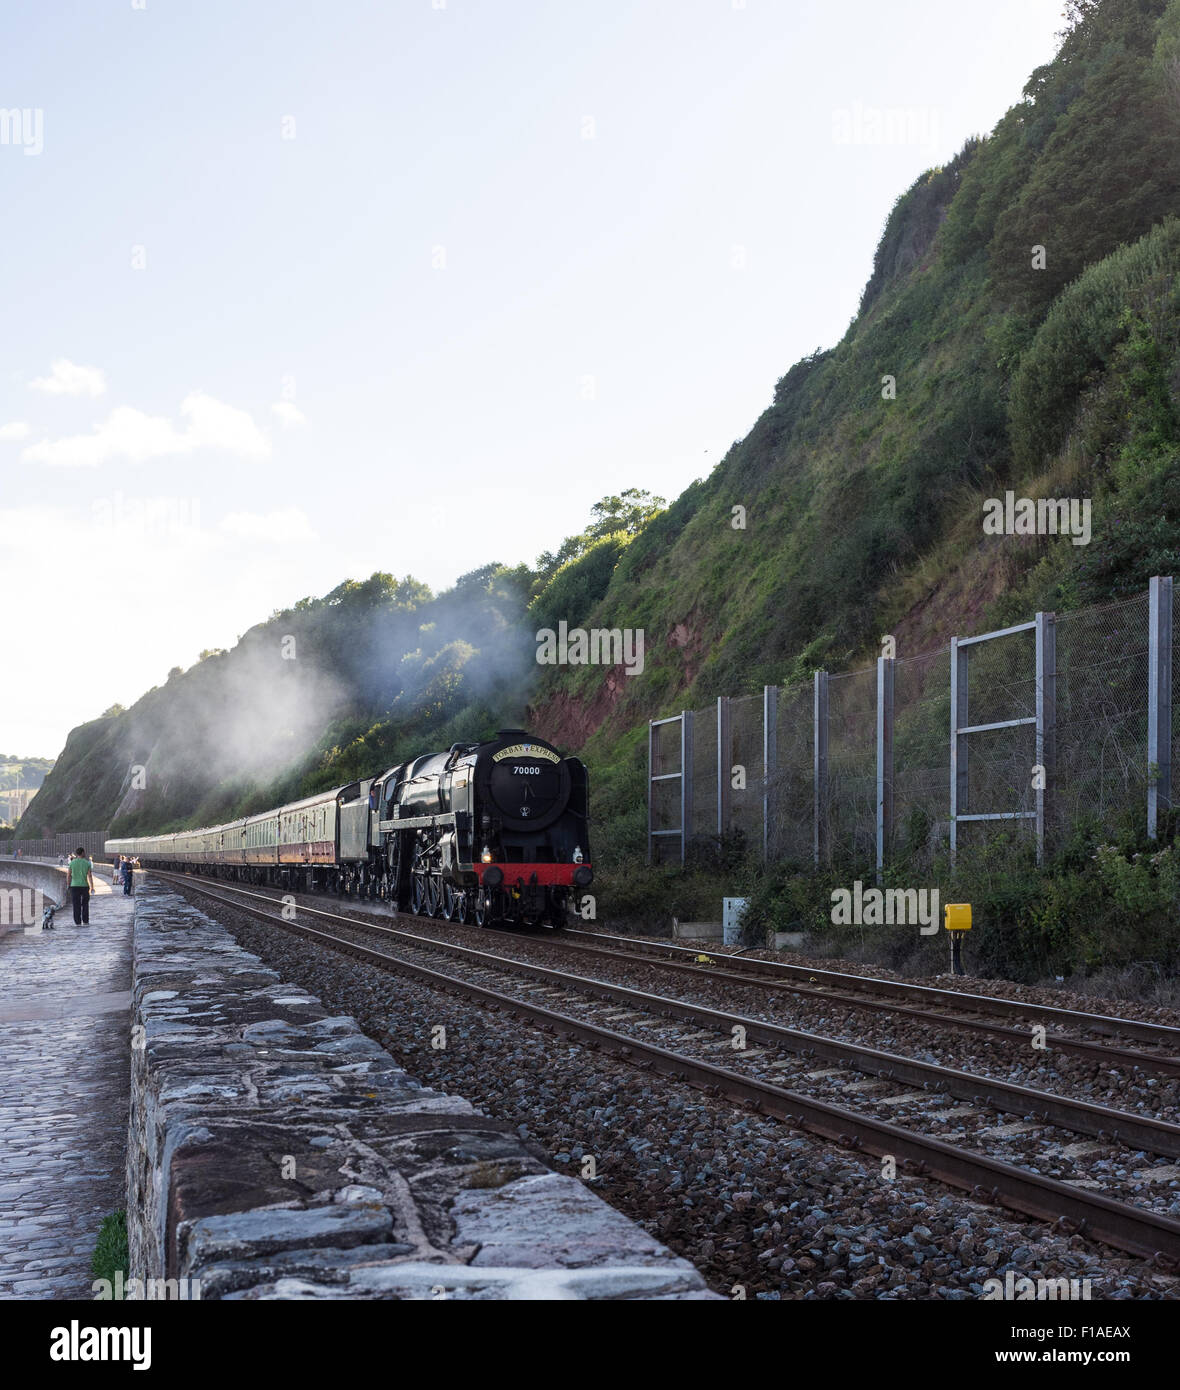 Teignmouth Devon. 2015. The Torbay Express steam train on an excursion along the Brunel railway at Teignmouth. Stock Photo